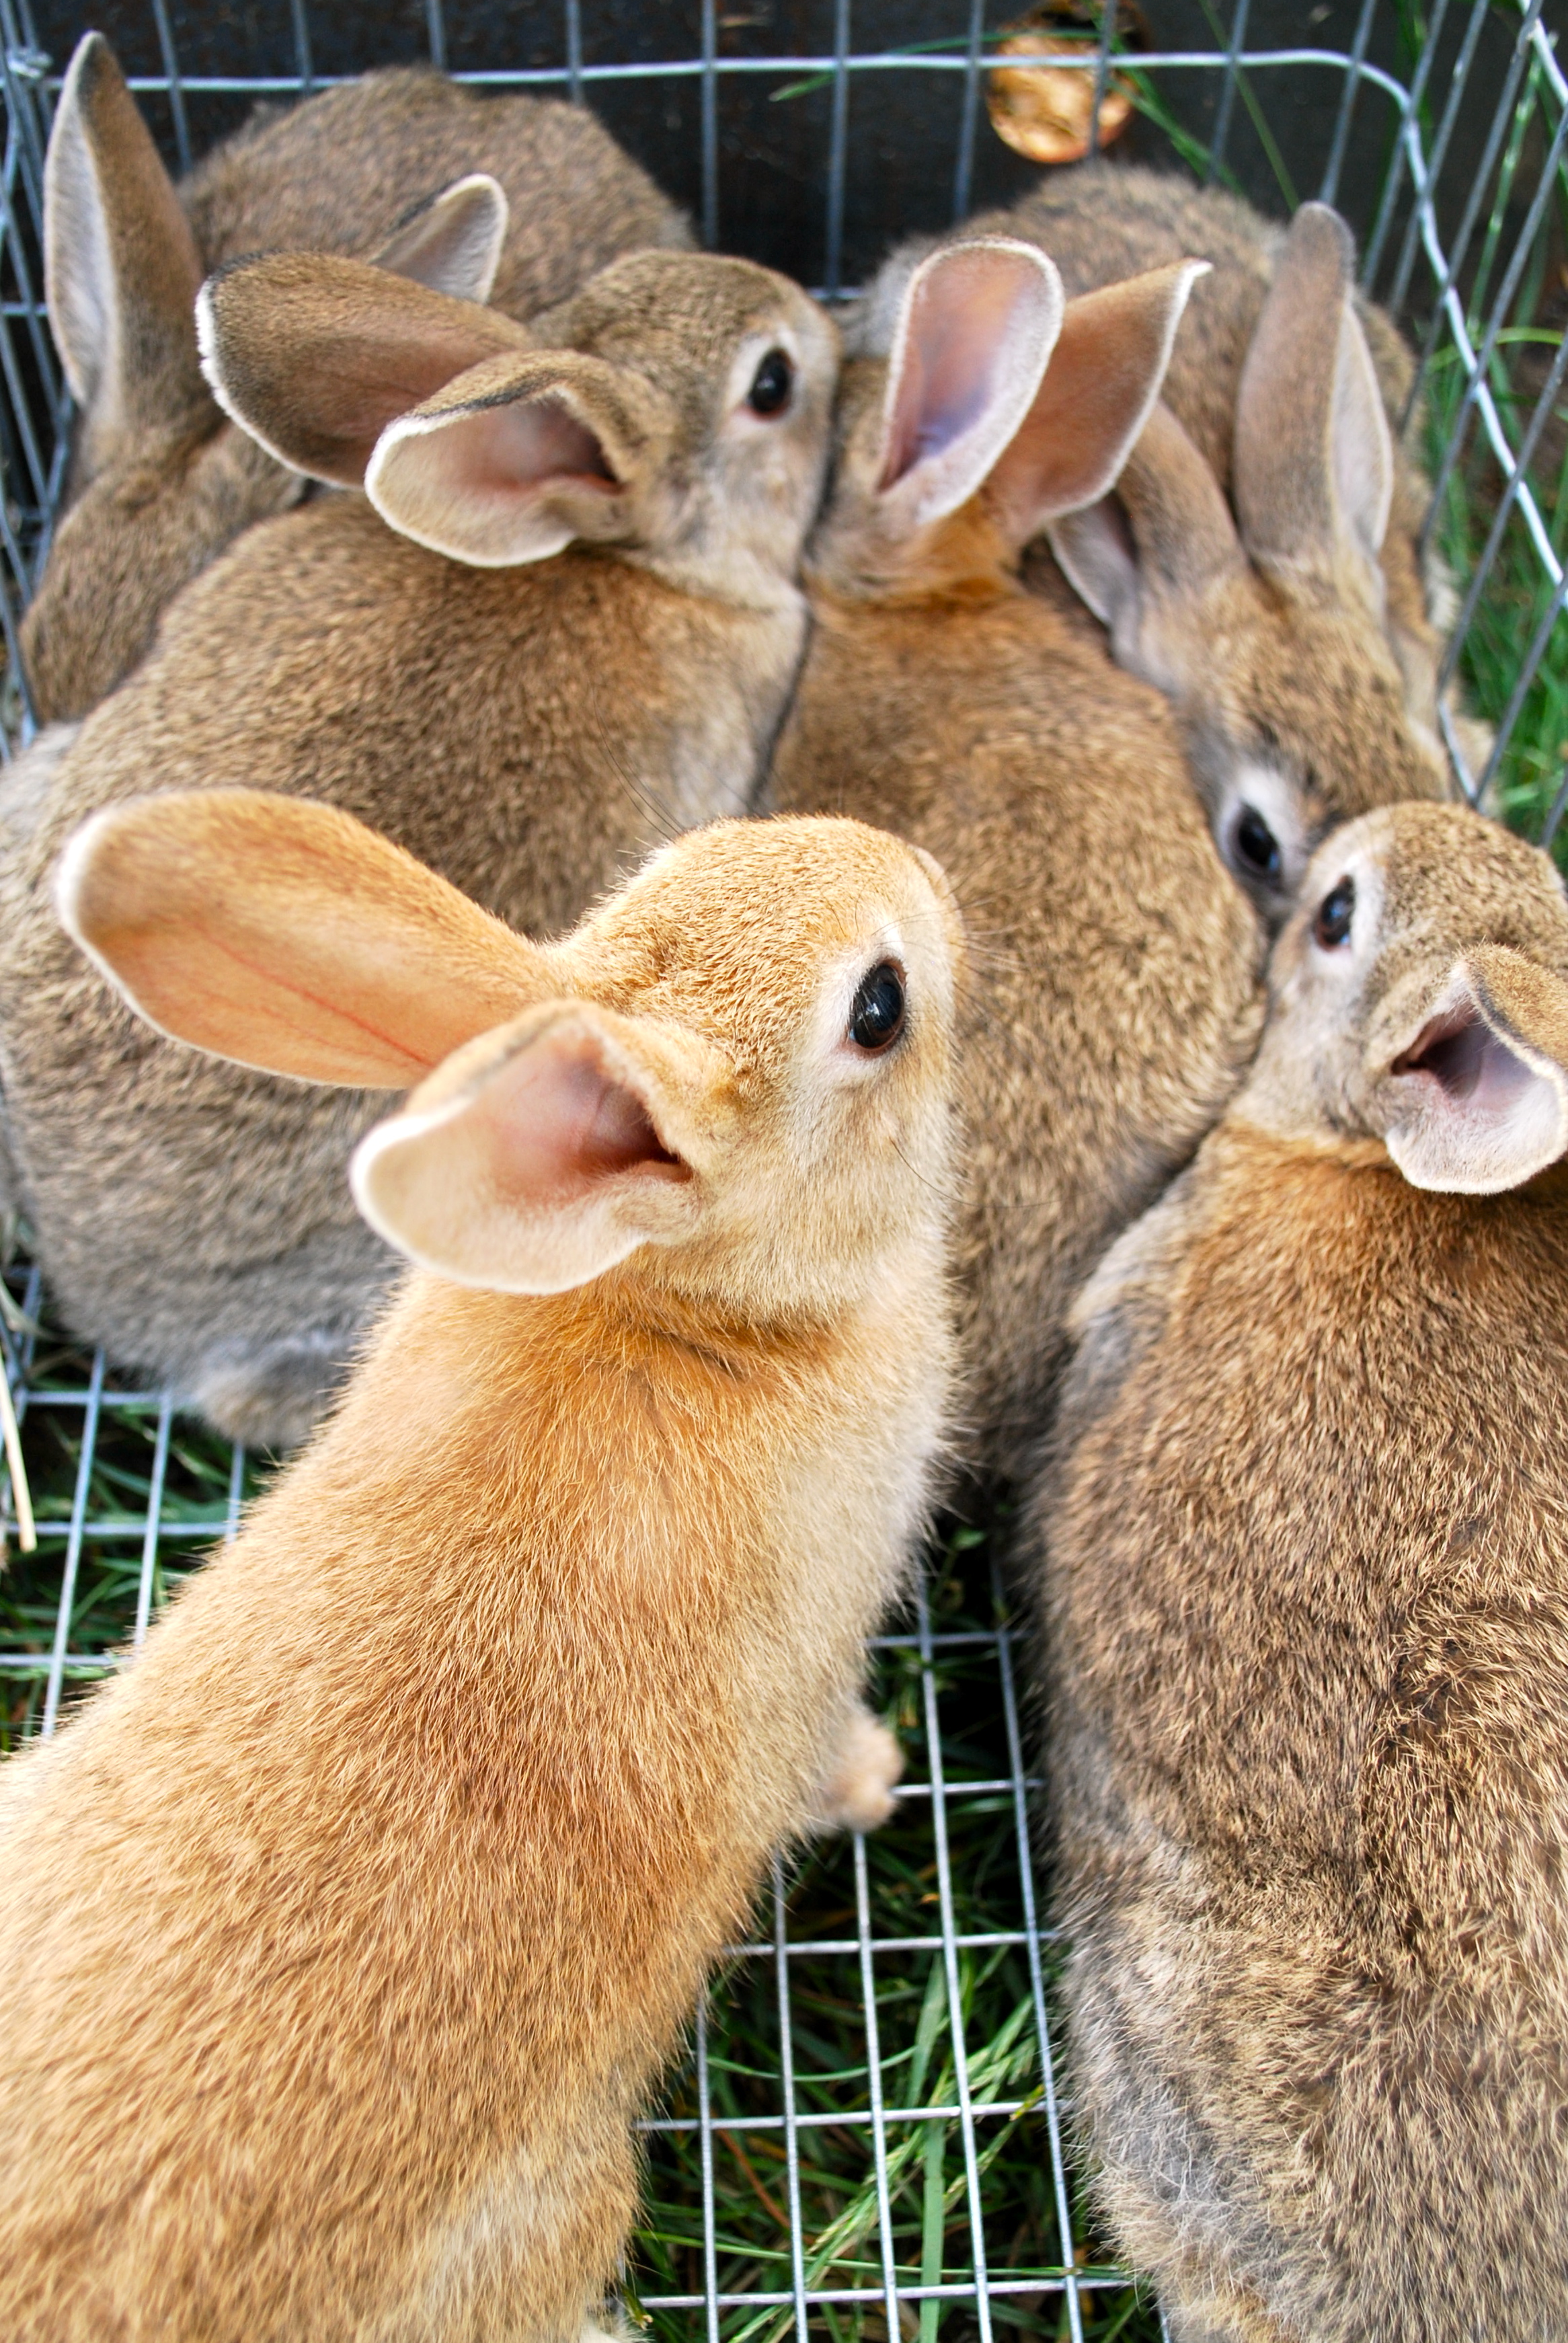 What Are The Benefits Of Weaning Rabbits?